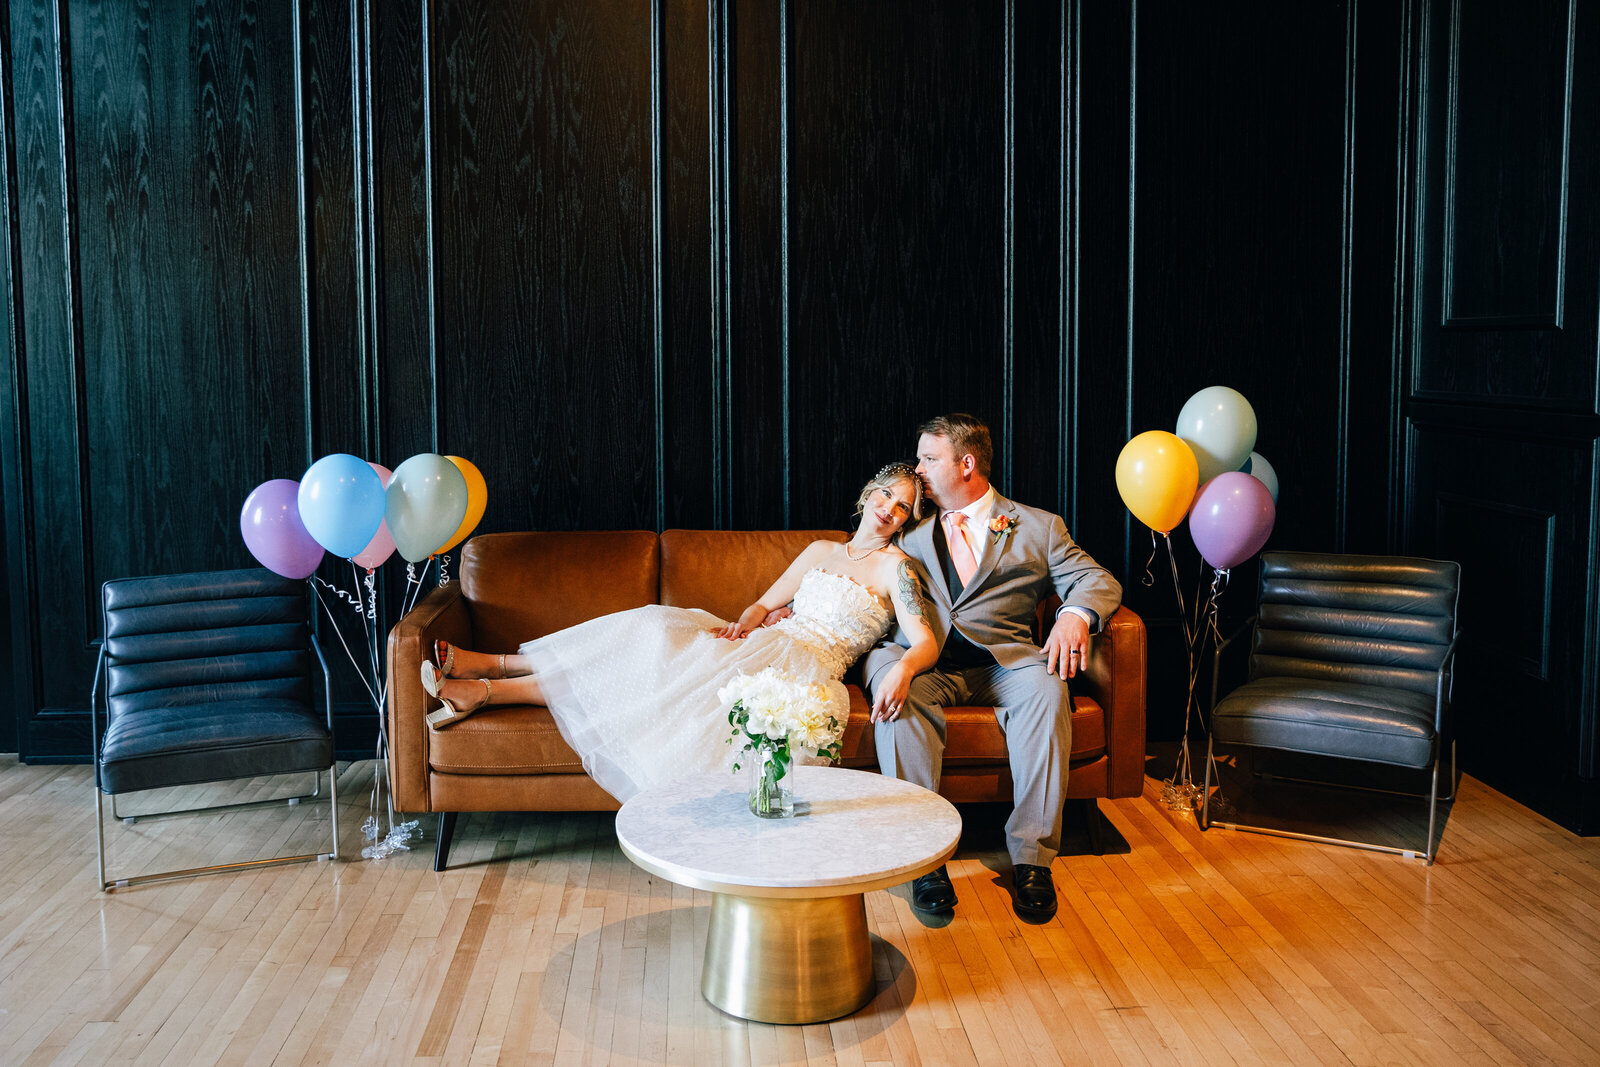 Bride and Groom on couch with ballons